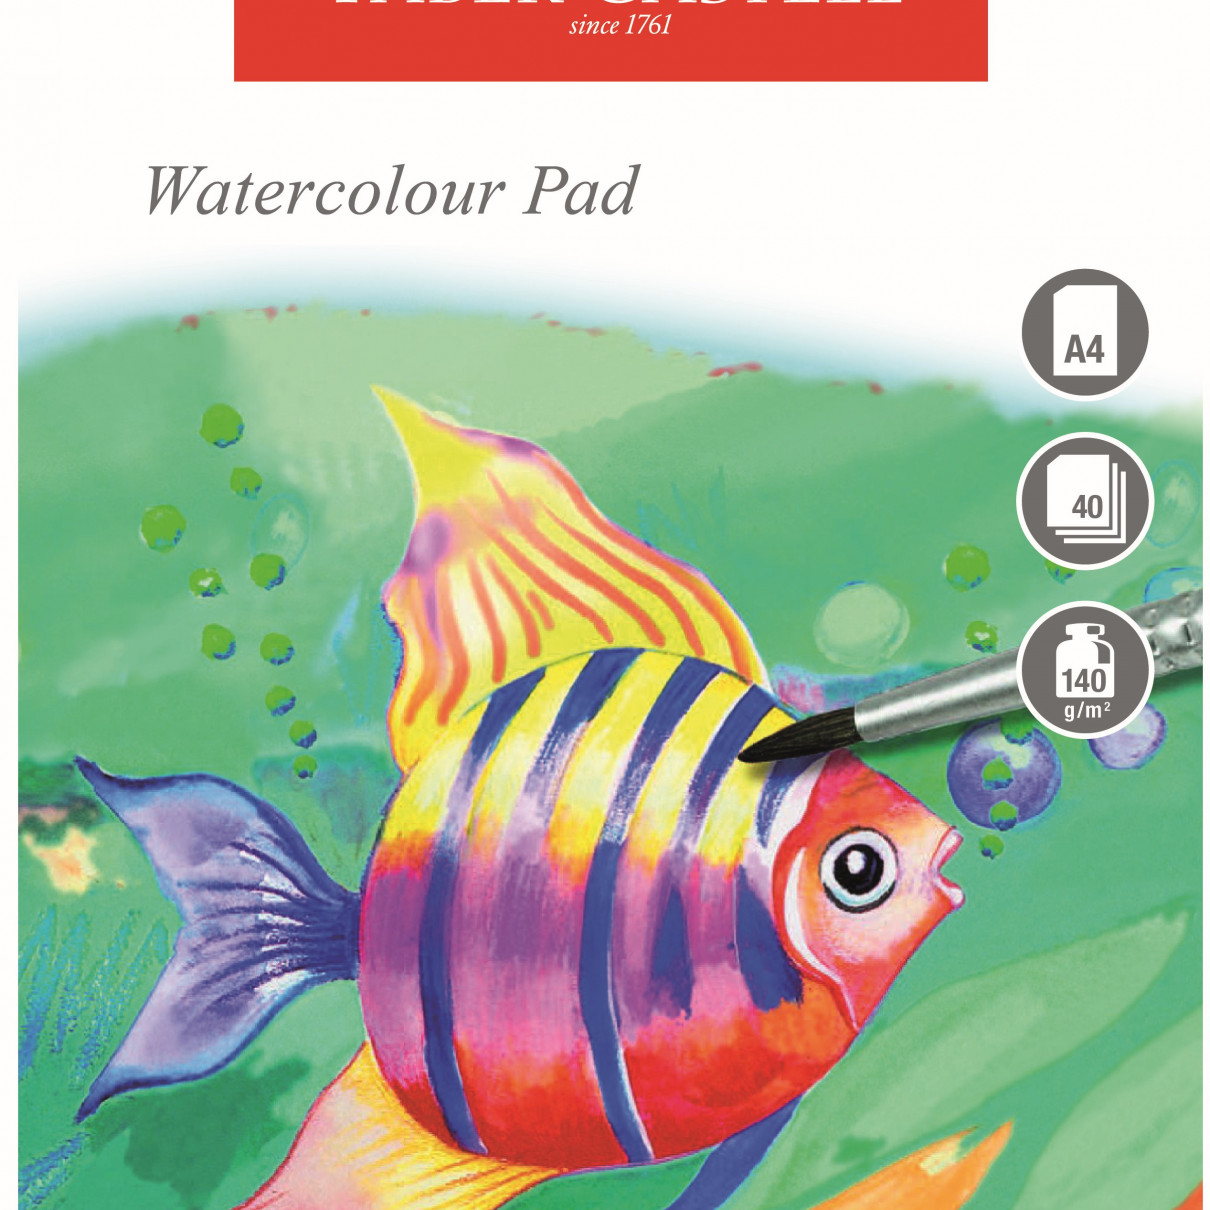 Faber-Castell Watercolour Pad